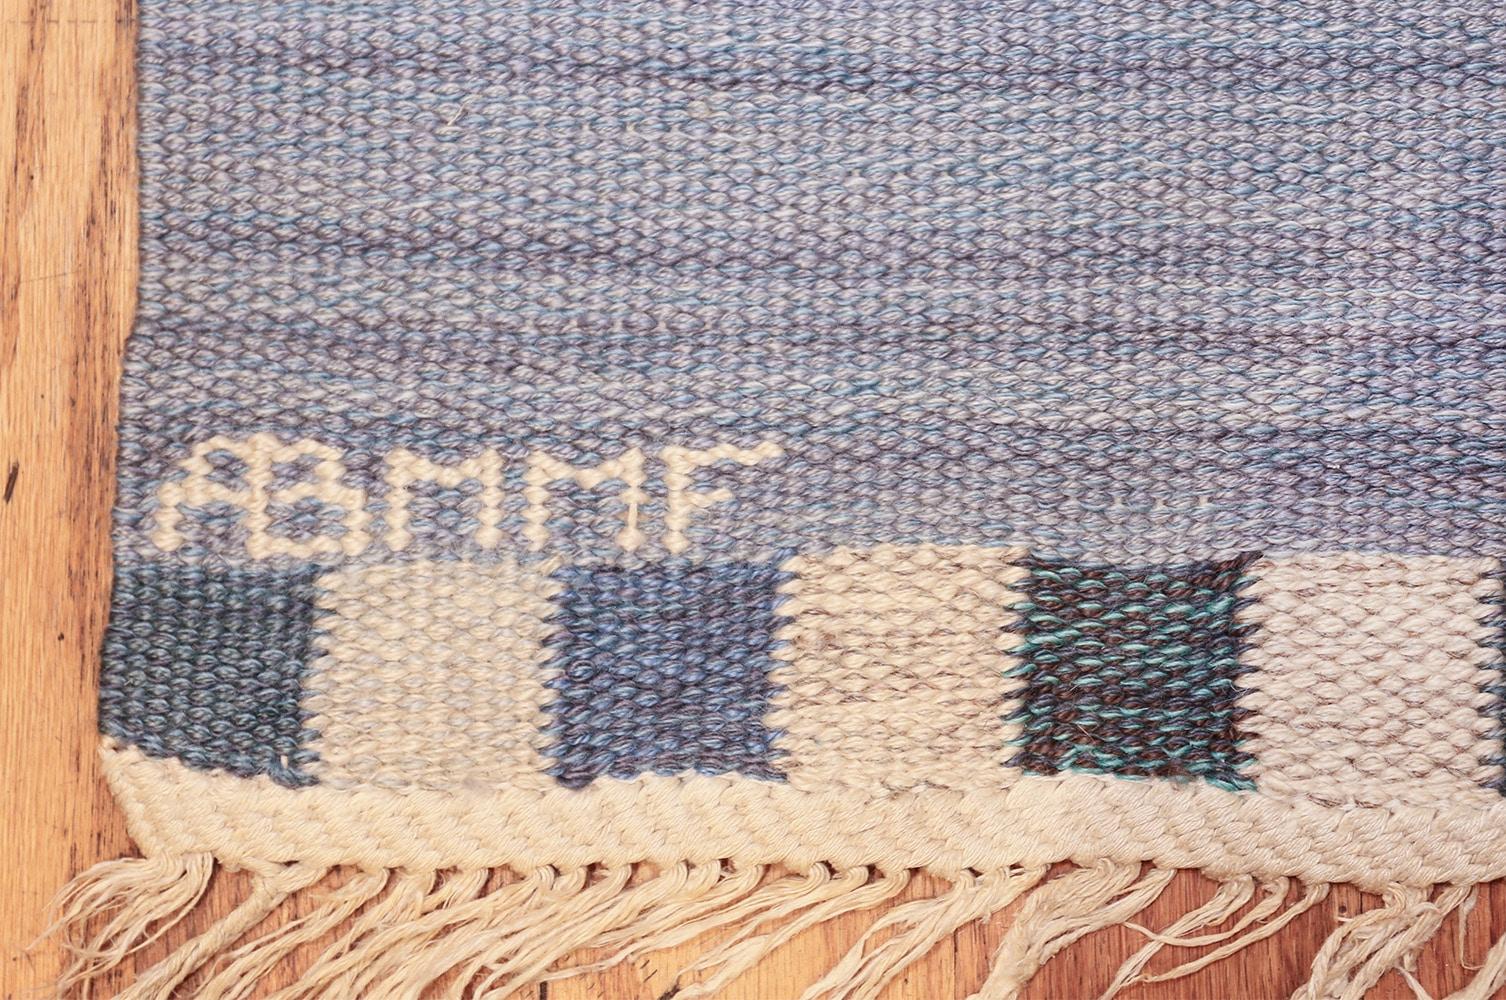 Hand-Woven Vintage Swedish Kilim by Marianne Richter for Marta Maas. Size: 7' 4